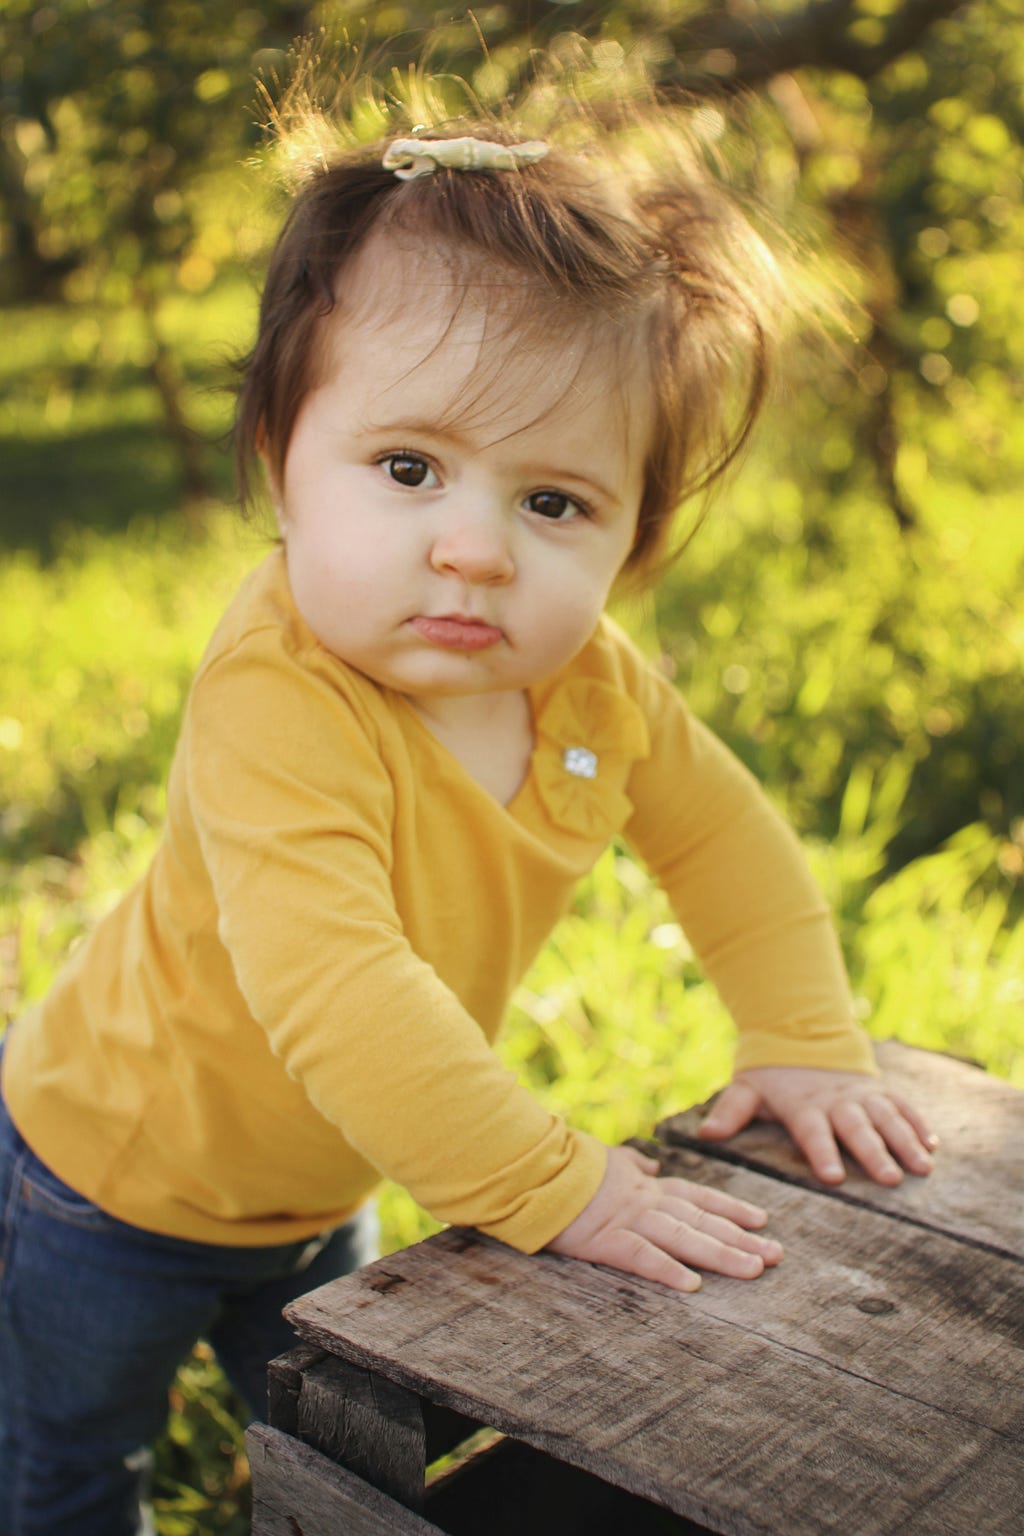 Toddler in a standing position